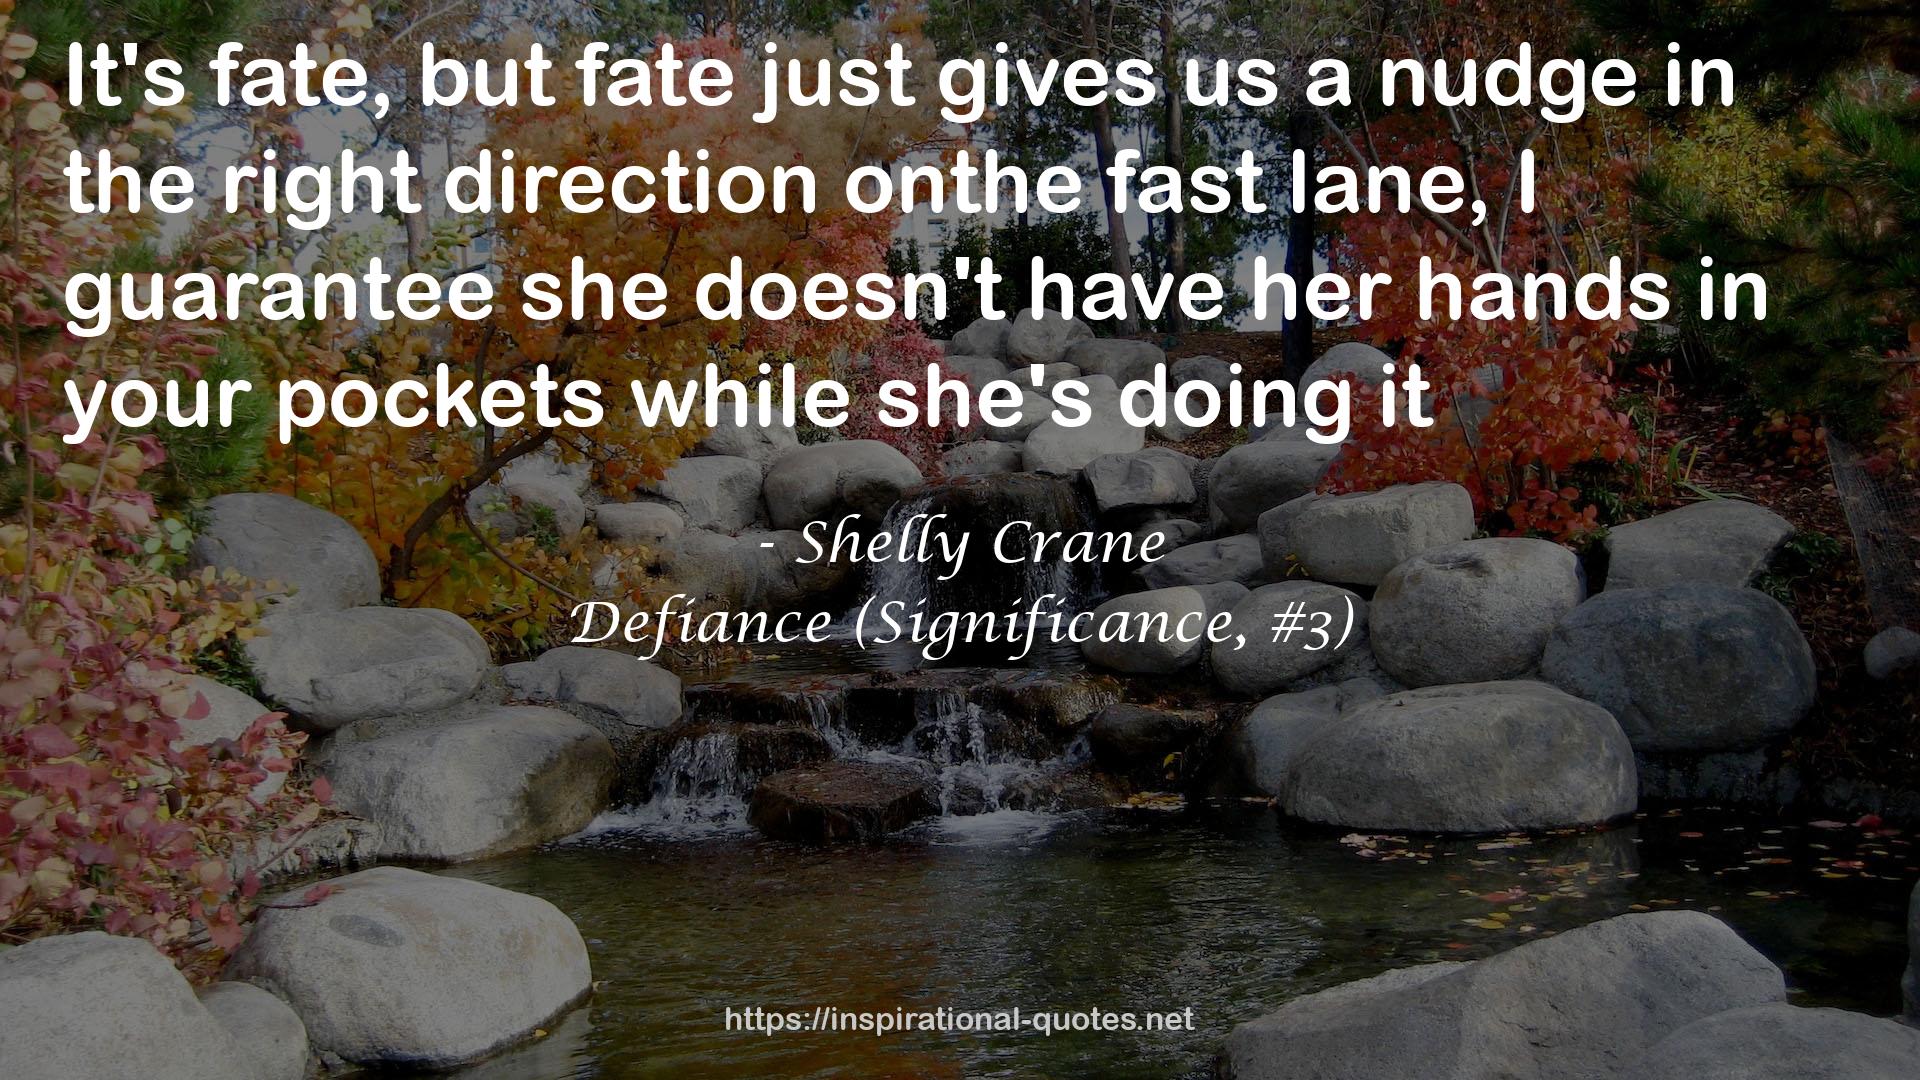 Defiance (Significance, #3) QUOTES